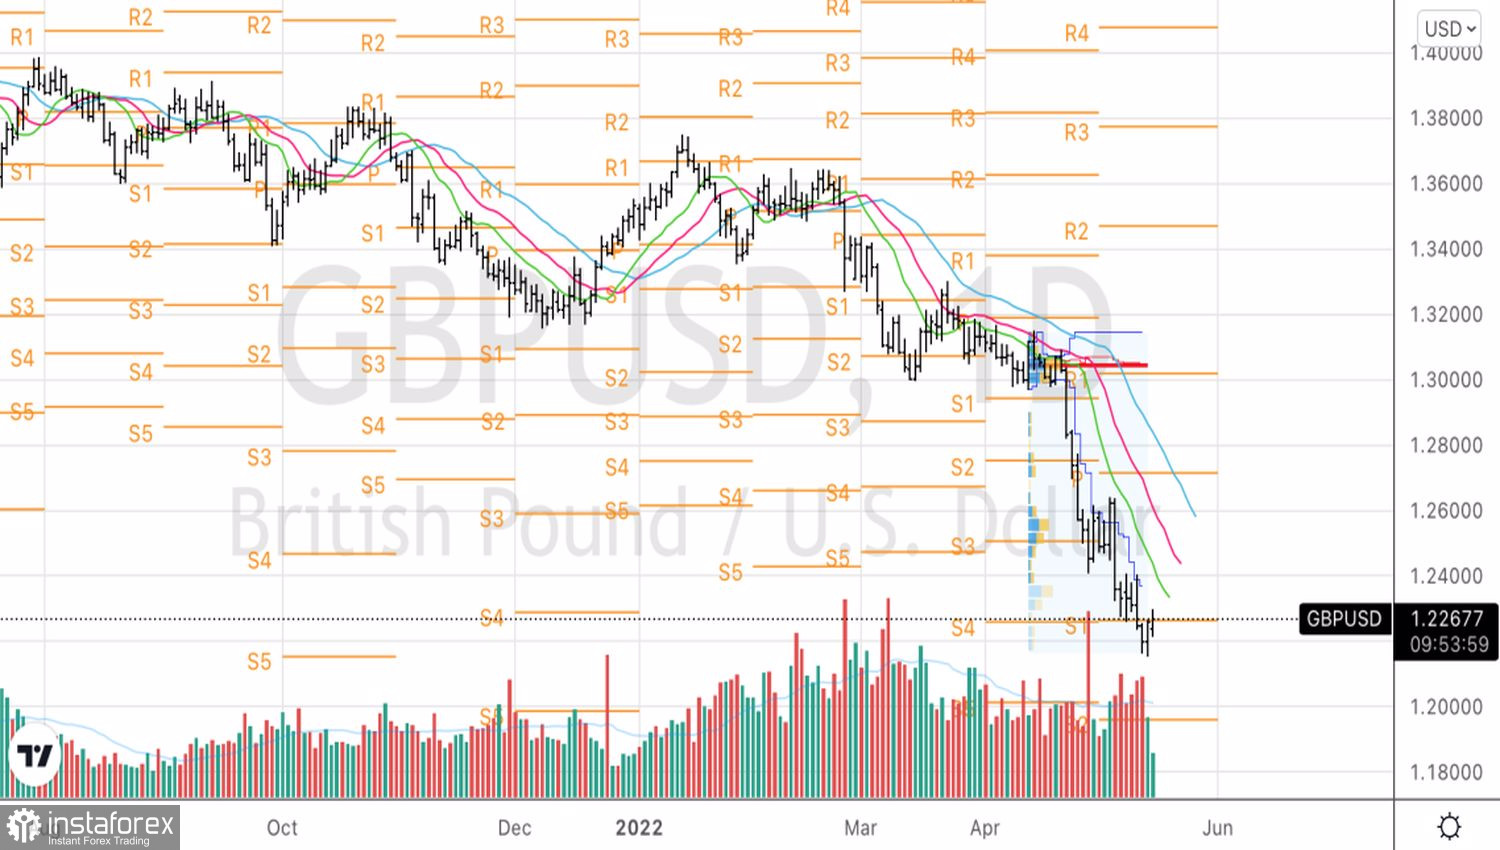 GBP/USD likely to decline further as stagflation threat arises